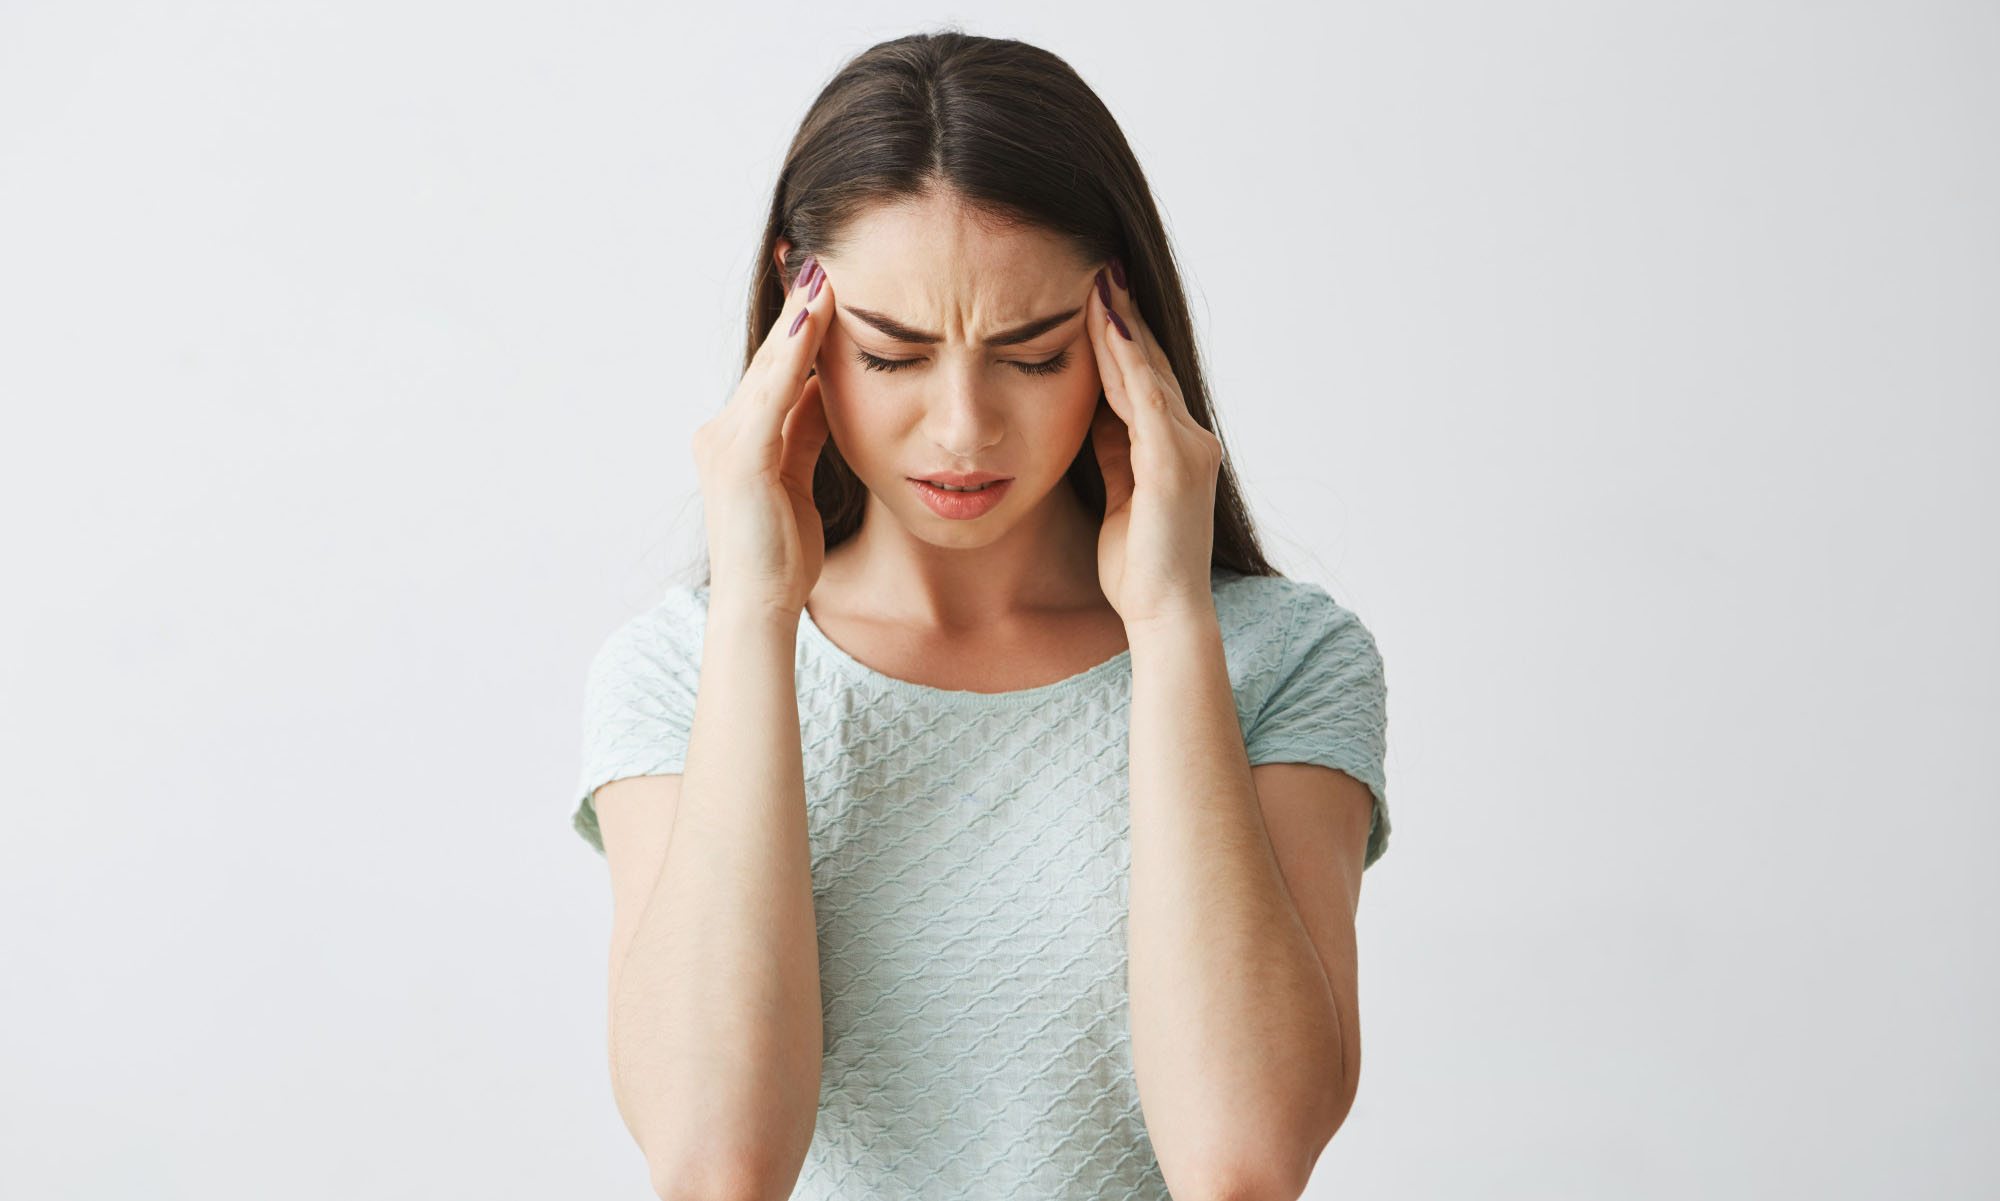 Headaches - Causes, Solutions, and Tips